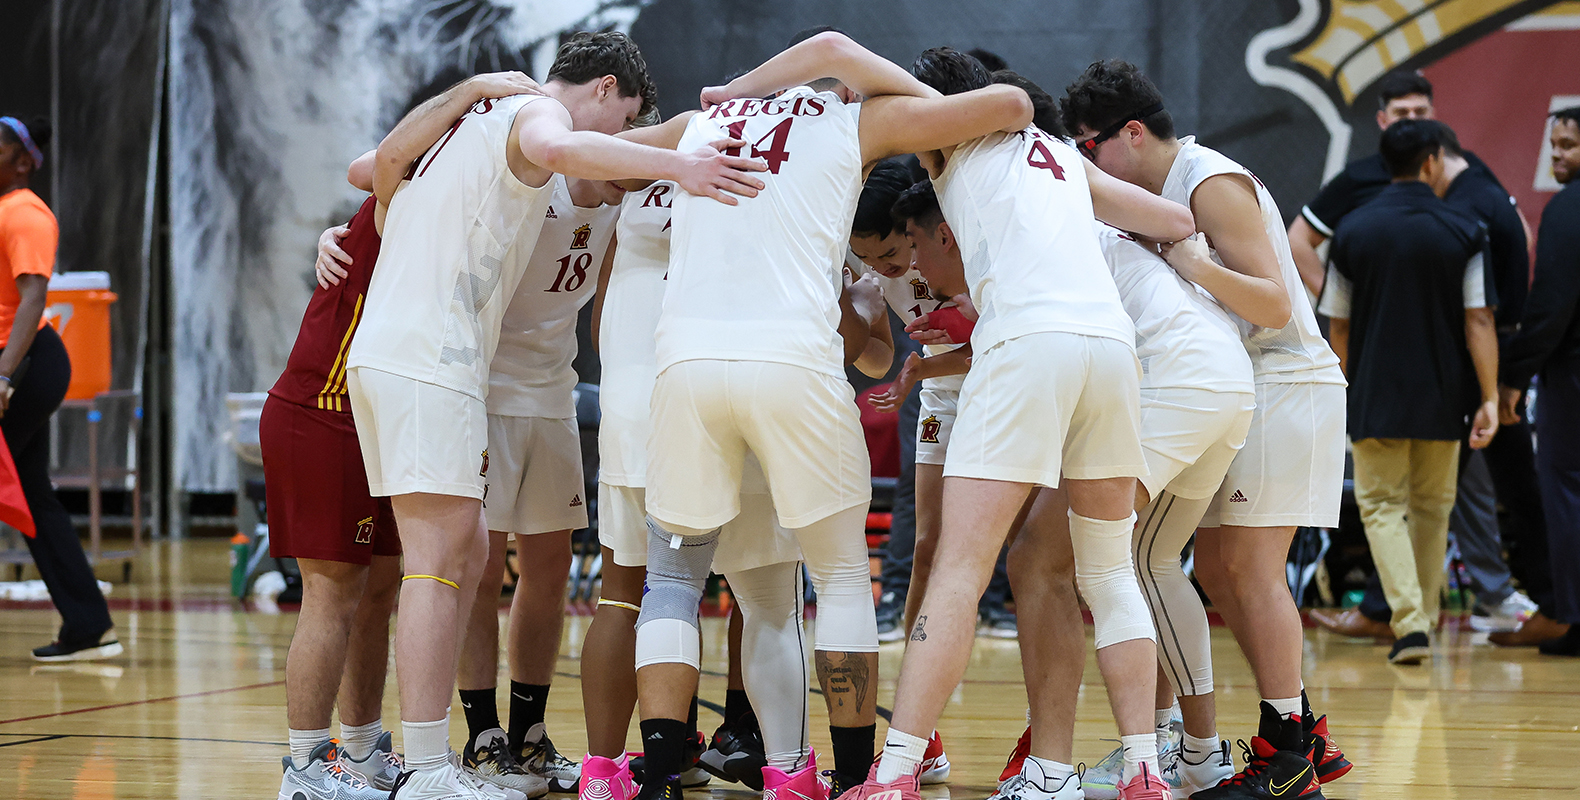 Men’s Volleyball Loses Home Contest to Lasell